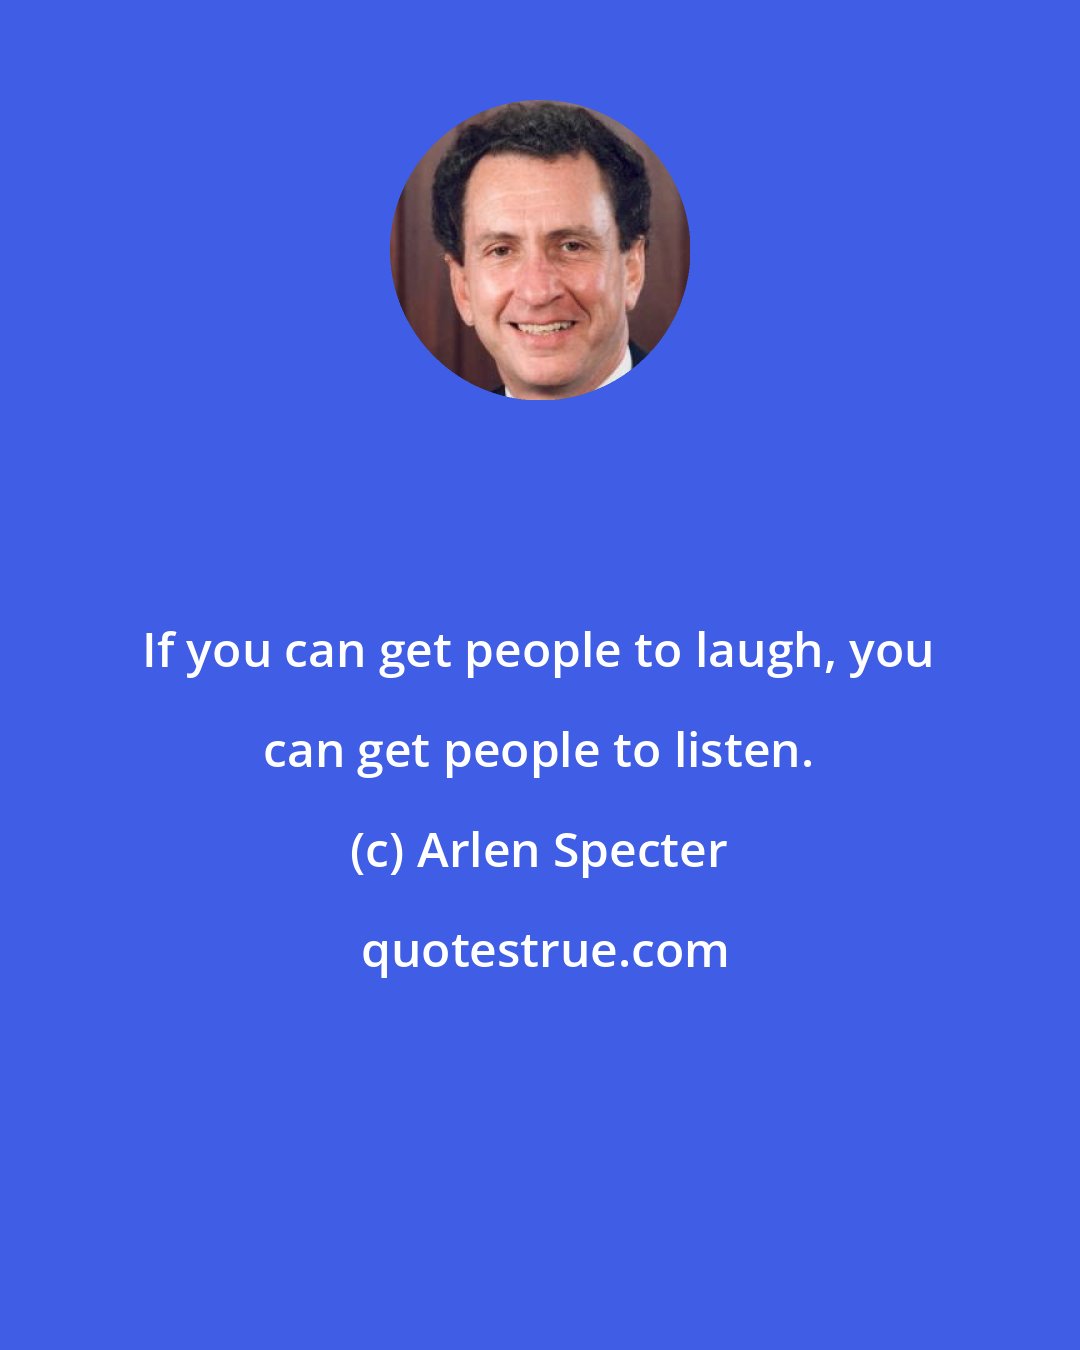 Arlen Specter: If you can get people to laugh, you can get people to listen.